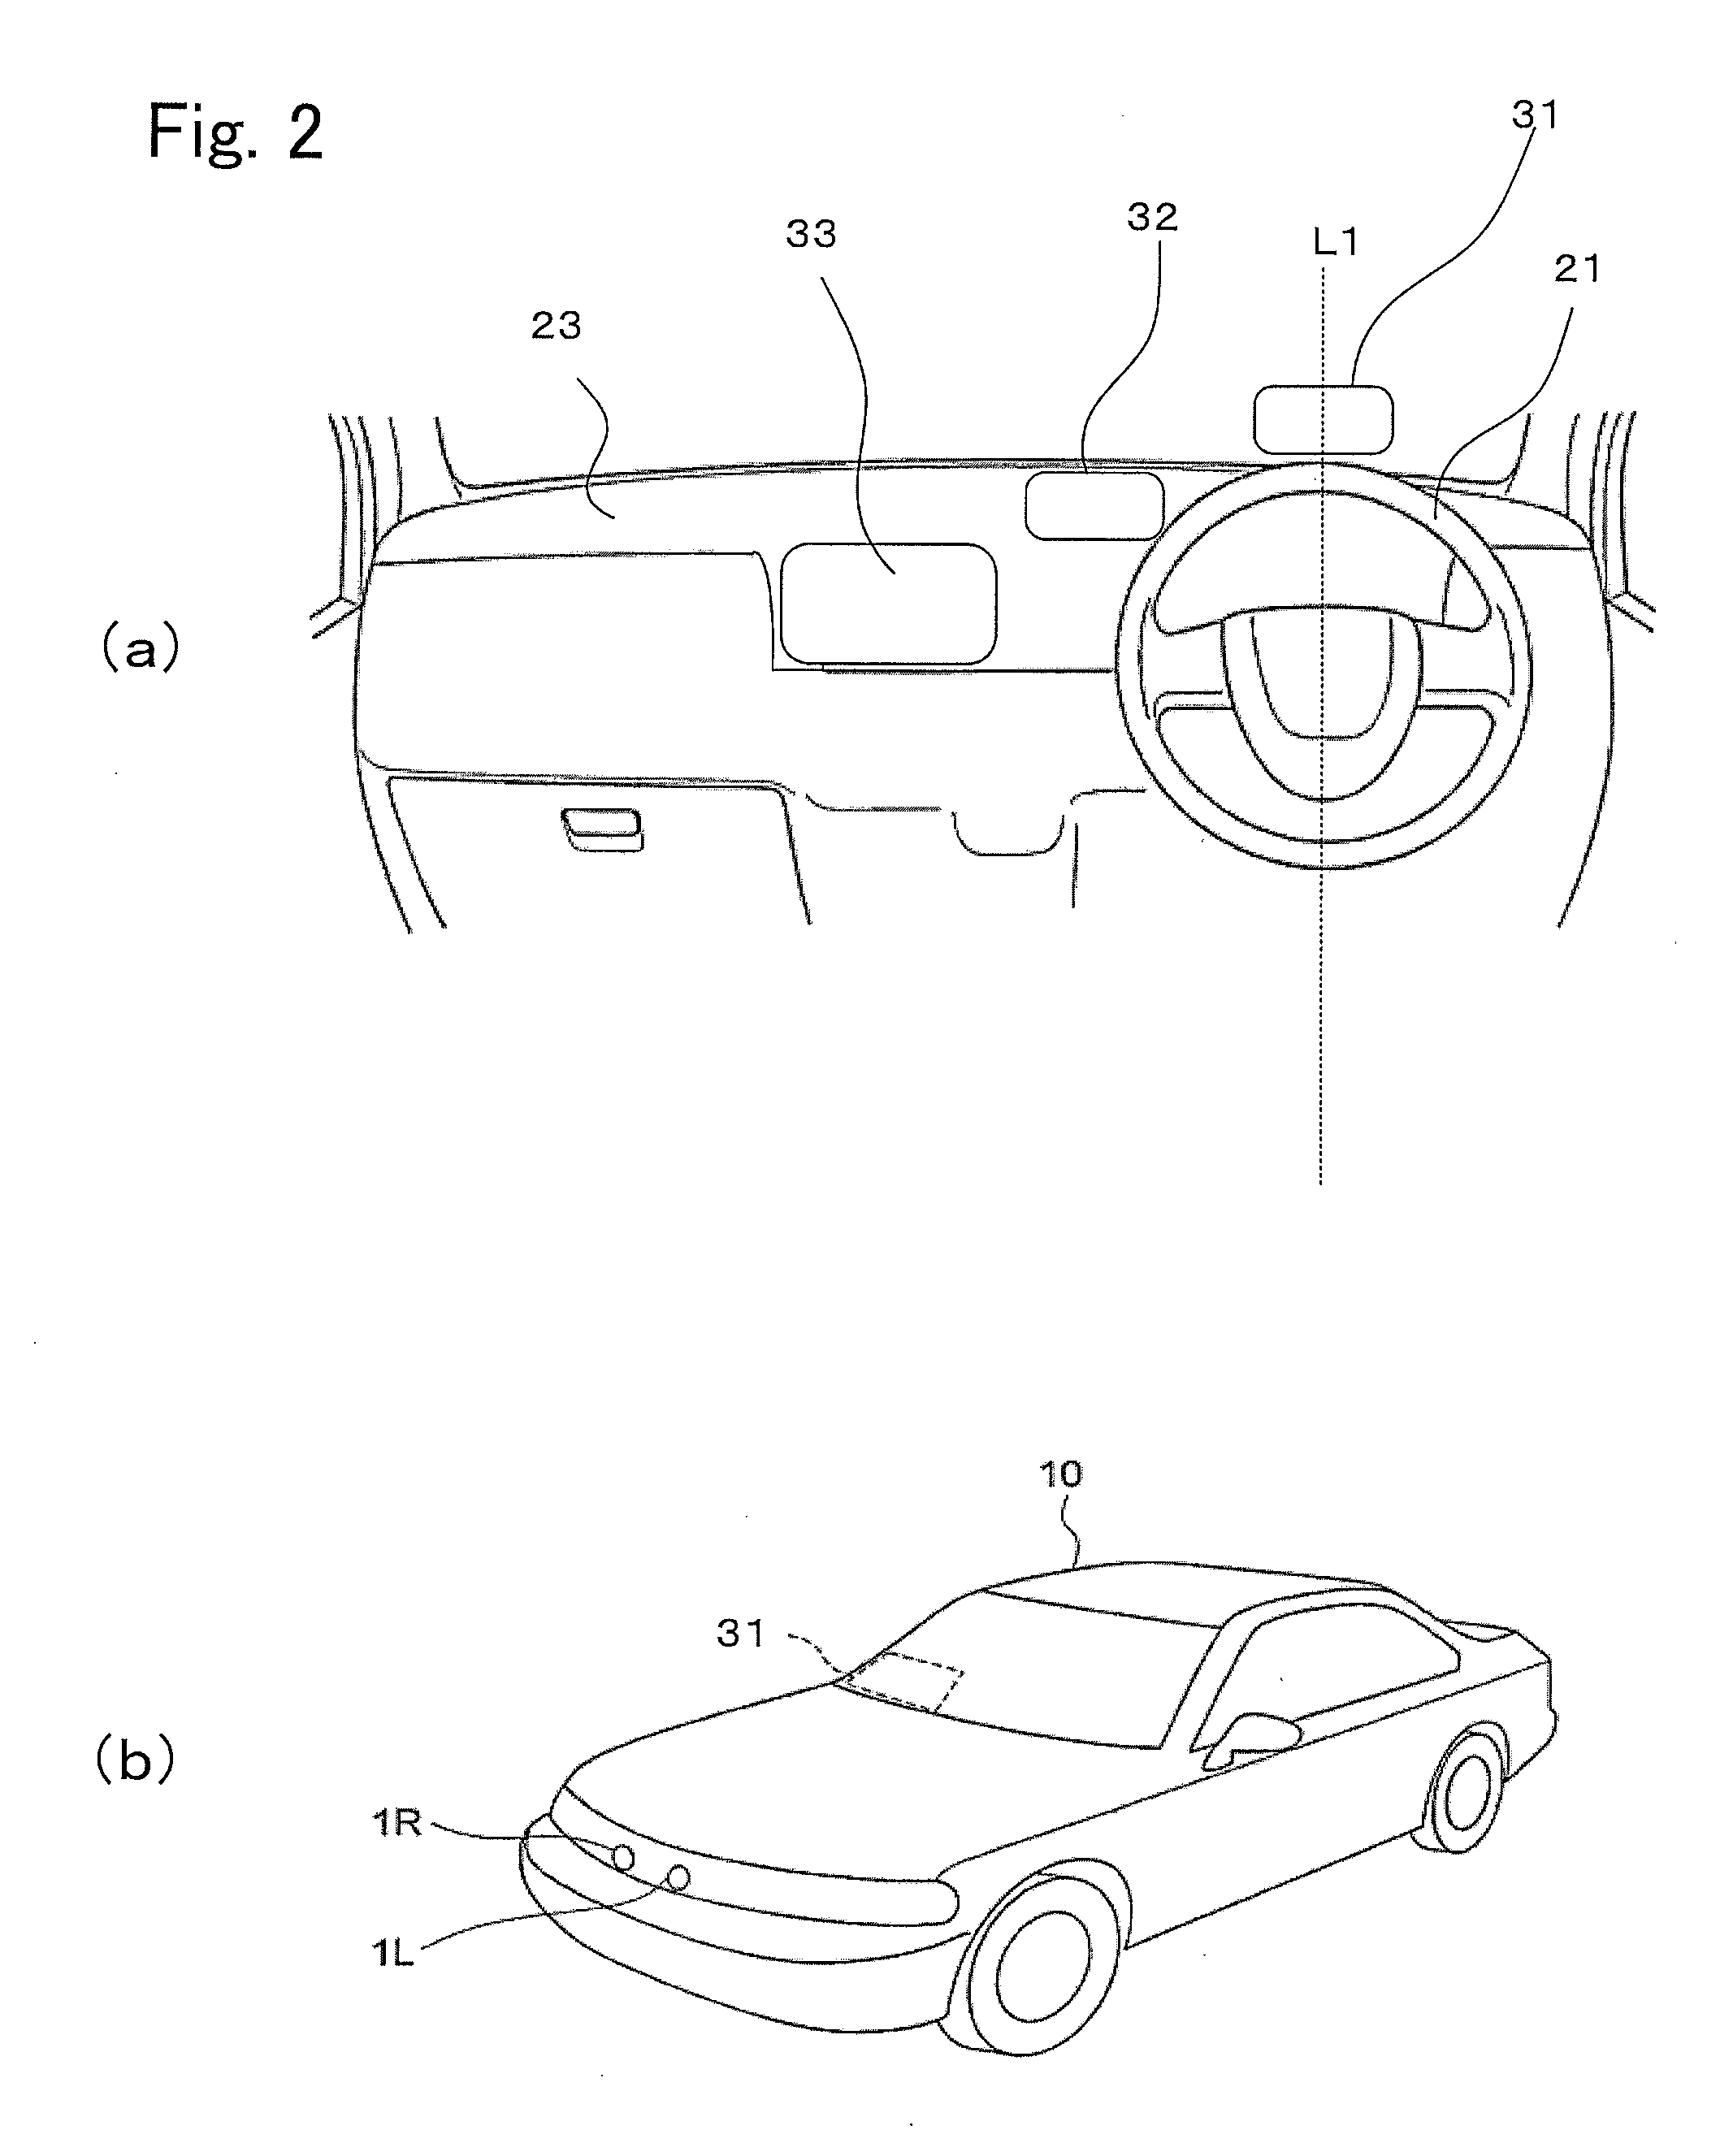 System for monitoring surroundings of a vehicle